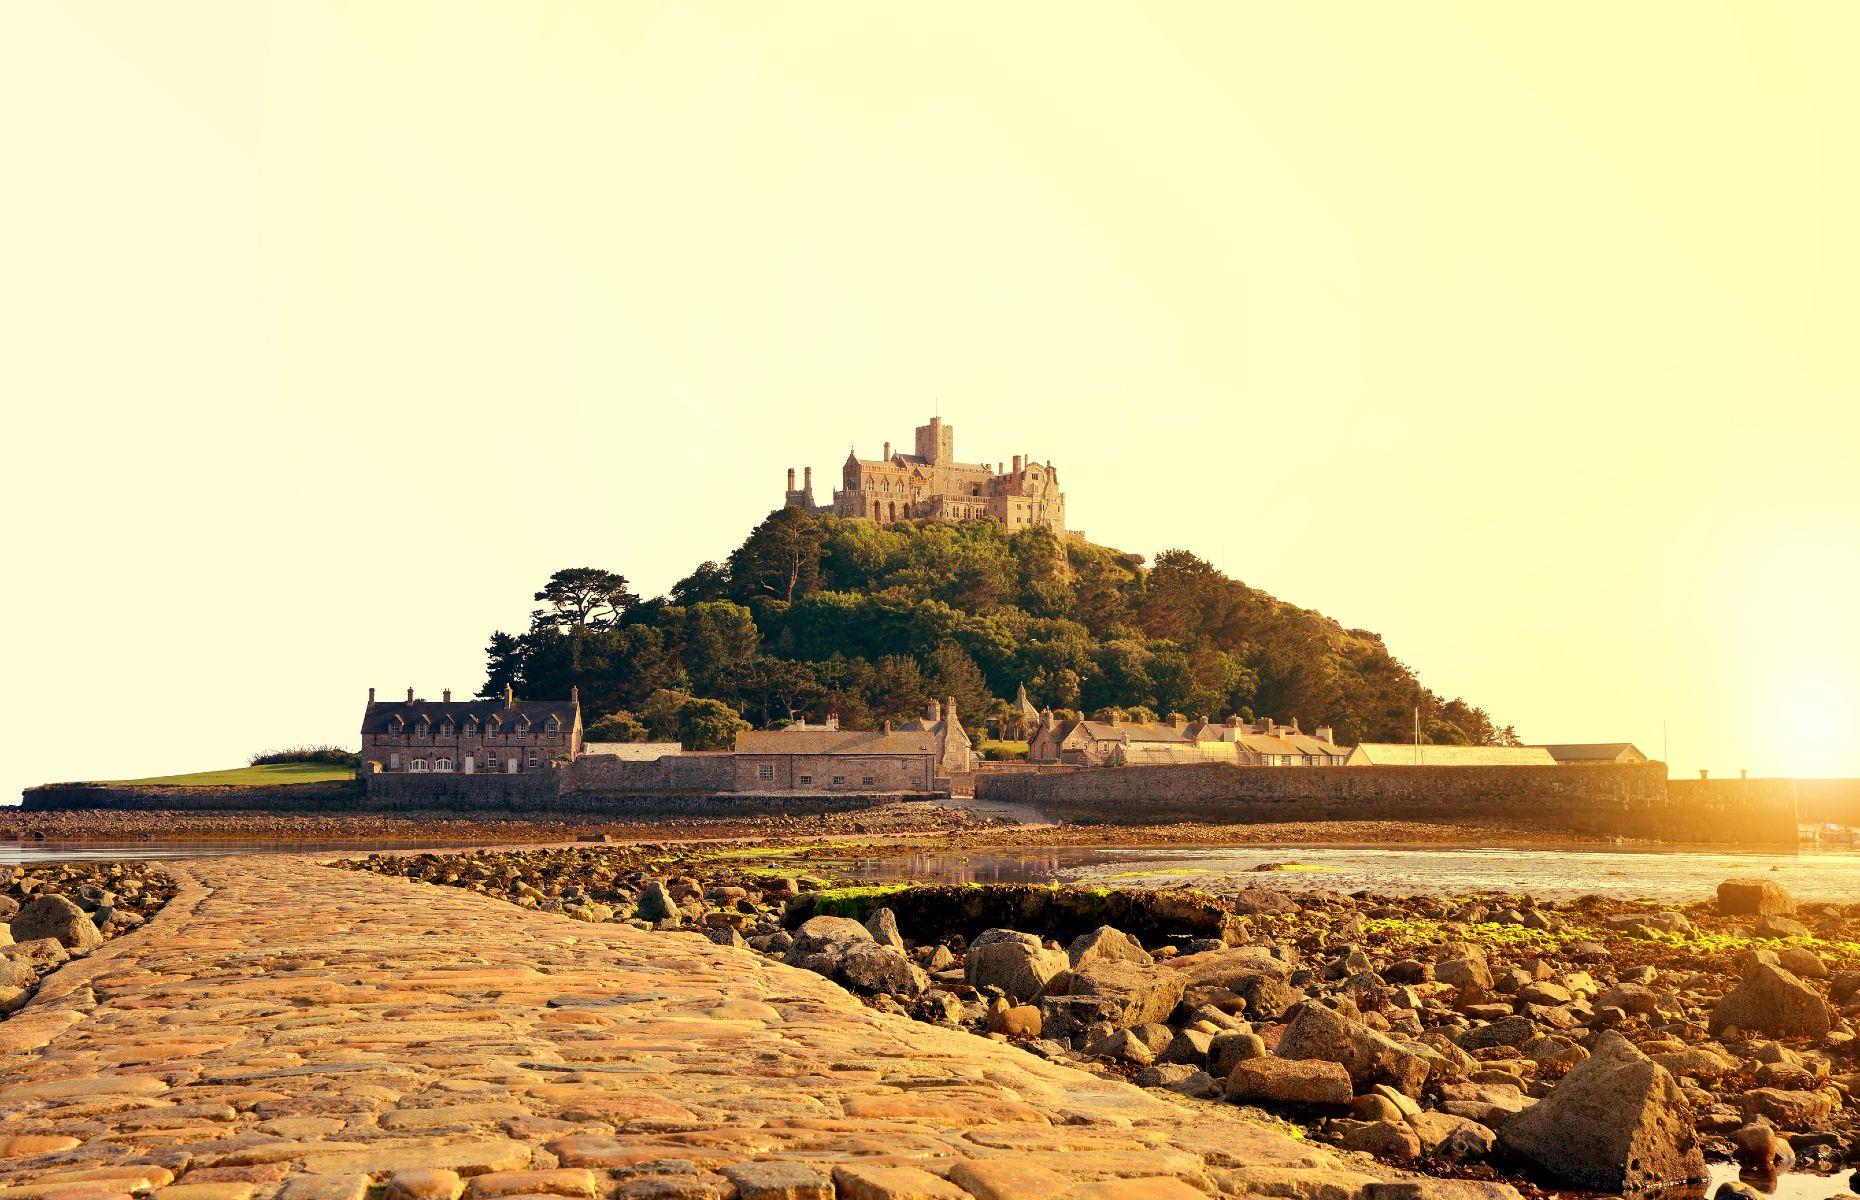 <p>Lying off Cornwall’s west coast, this <a href="https://www.stmichaelsmount.co.uk/">dramatic fortress</a> and island has been home to the St Aubyn family since the 17th century. It can only be reached by boat or by walking, at low tide, across a granite causeway from nearby Mount’s Bay in the town of Marazion, close to Penzance. With its spectacular old castle, beautiful gardens and breathtaking ocean views, the rocky island is a much-photographed jewel of the Cornish coastline.</p>